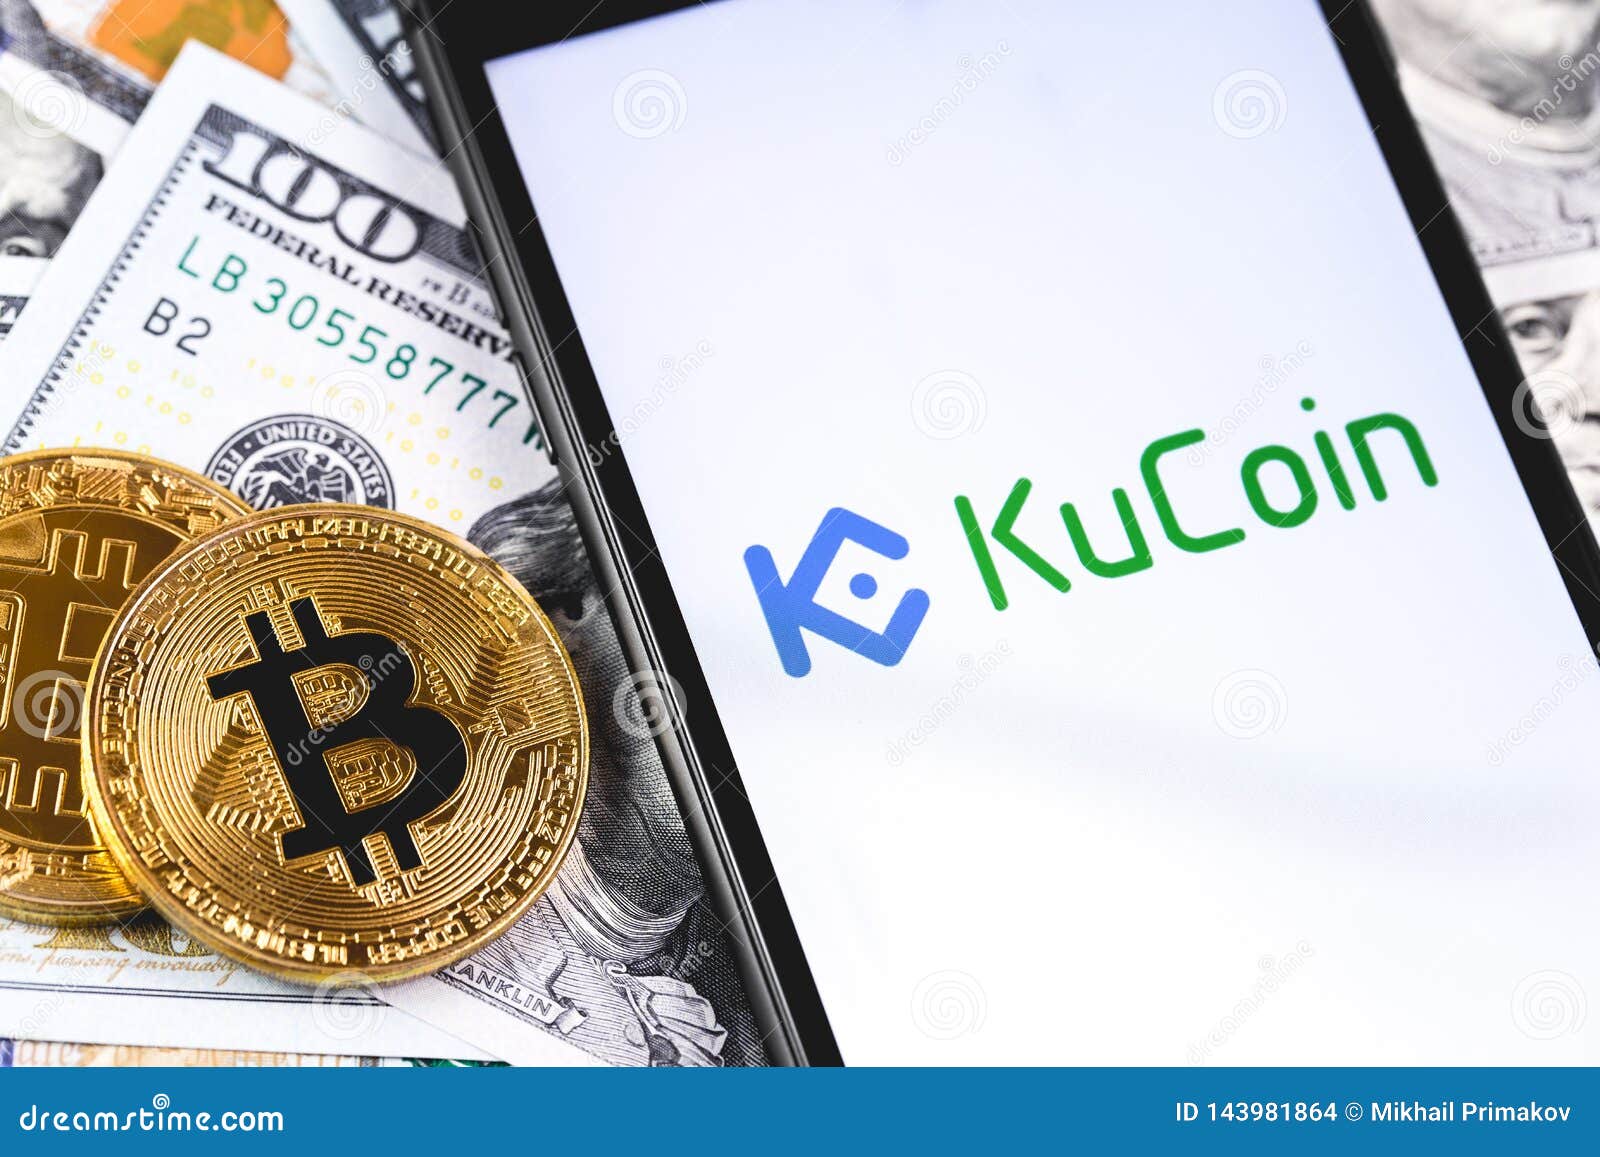 Dutch central bank warns that KuCoin operating without registration | Reuters